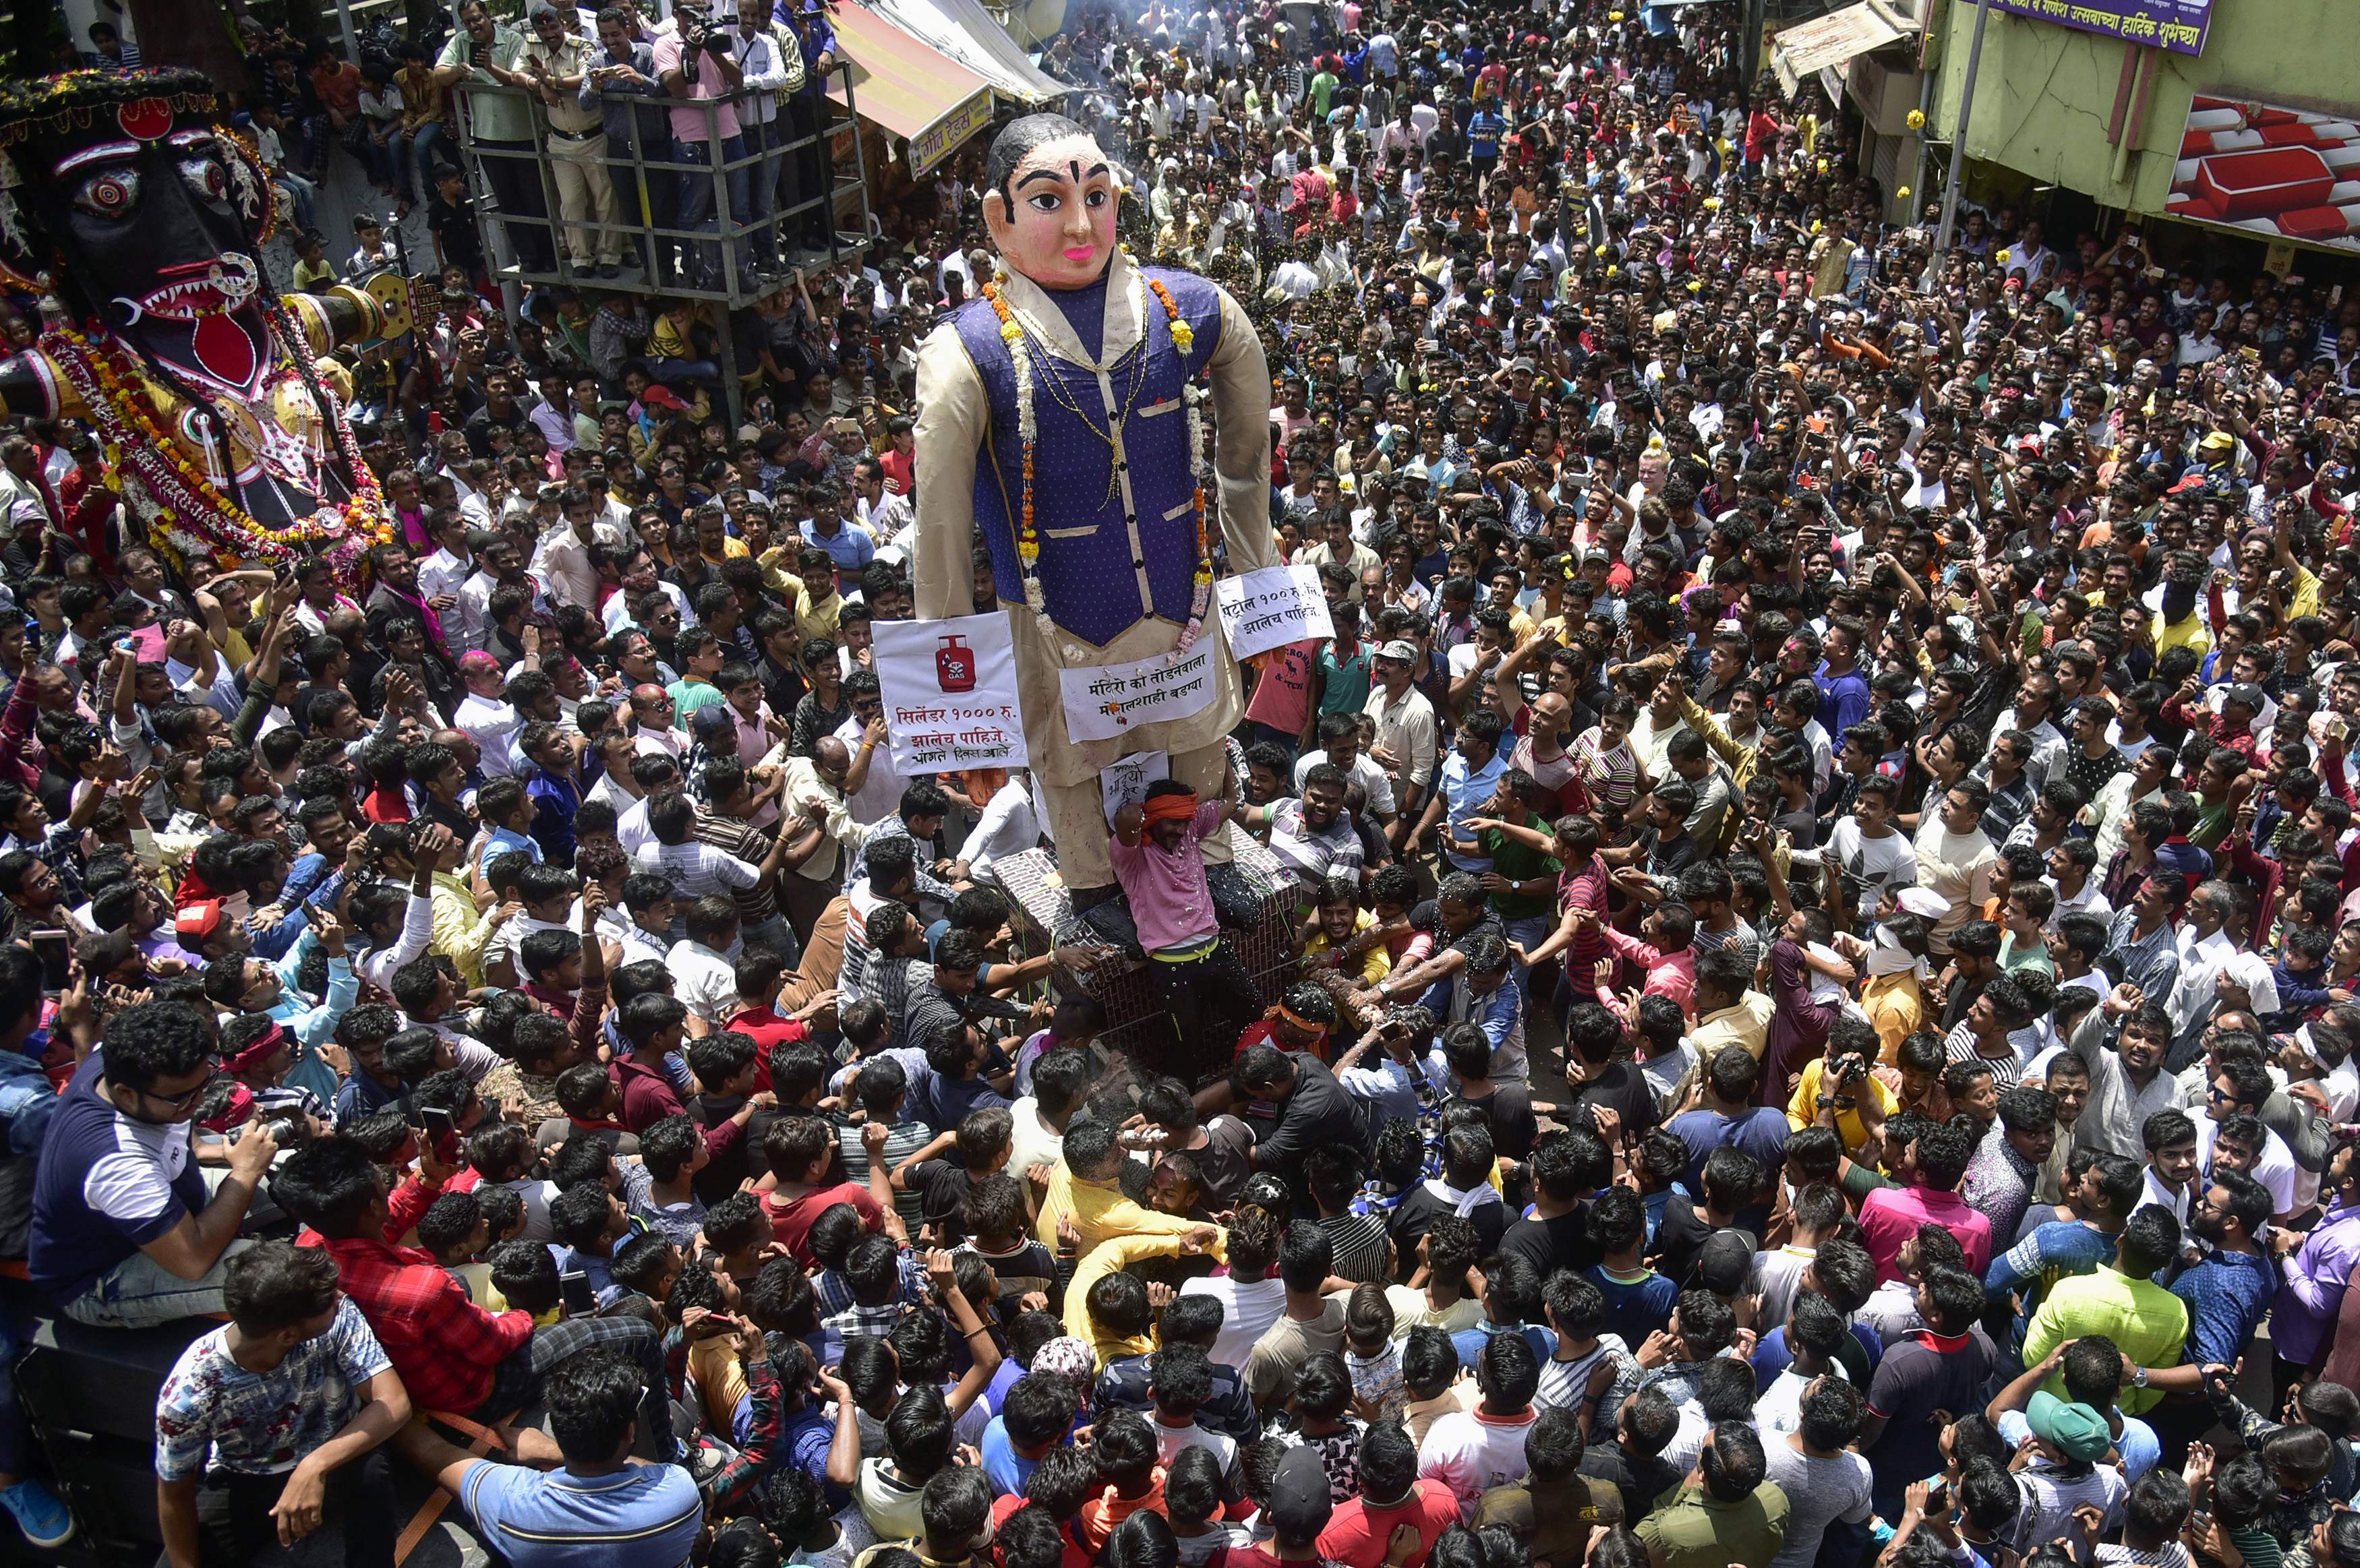 Indian revelers gather around idols as they are paraded to celebrate the Marbat Festival in Nagpur on Sept. 10, 2018. The festival, which is unique to the central Indian city, involves the construction, parading and burning of idols meant to represen